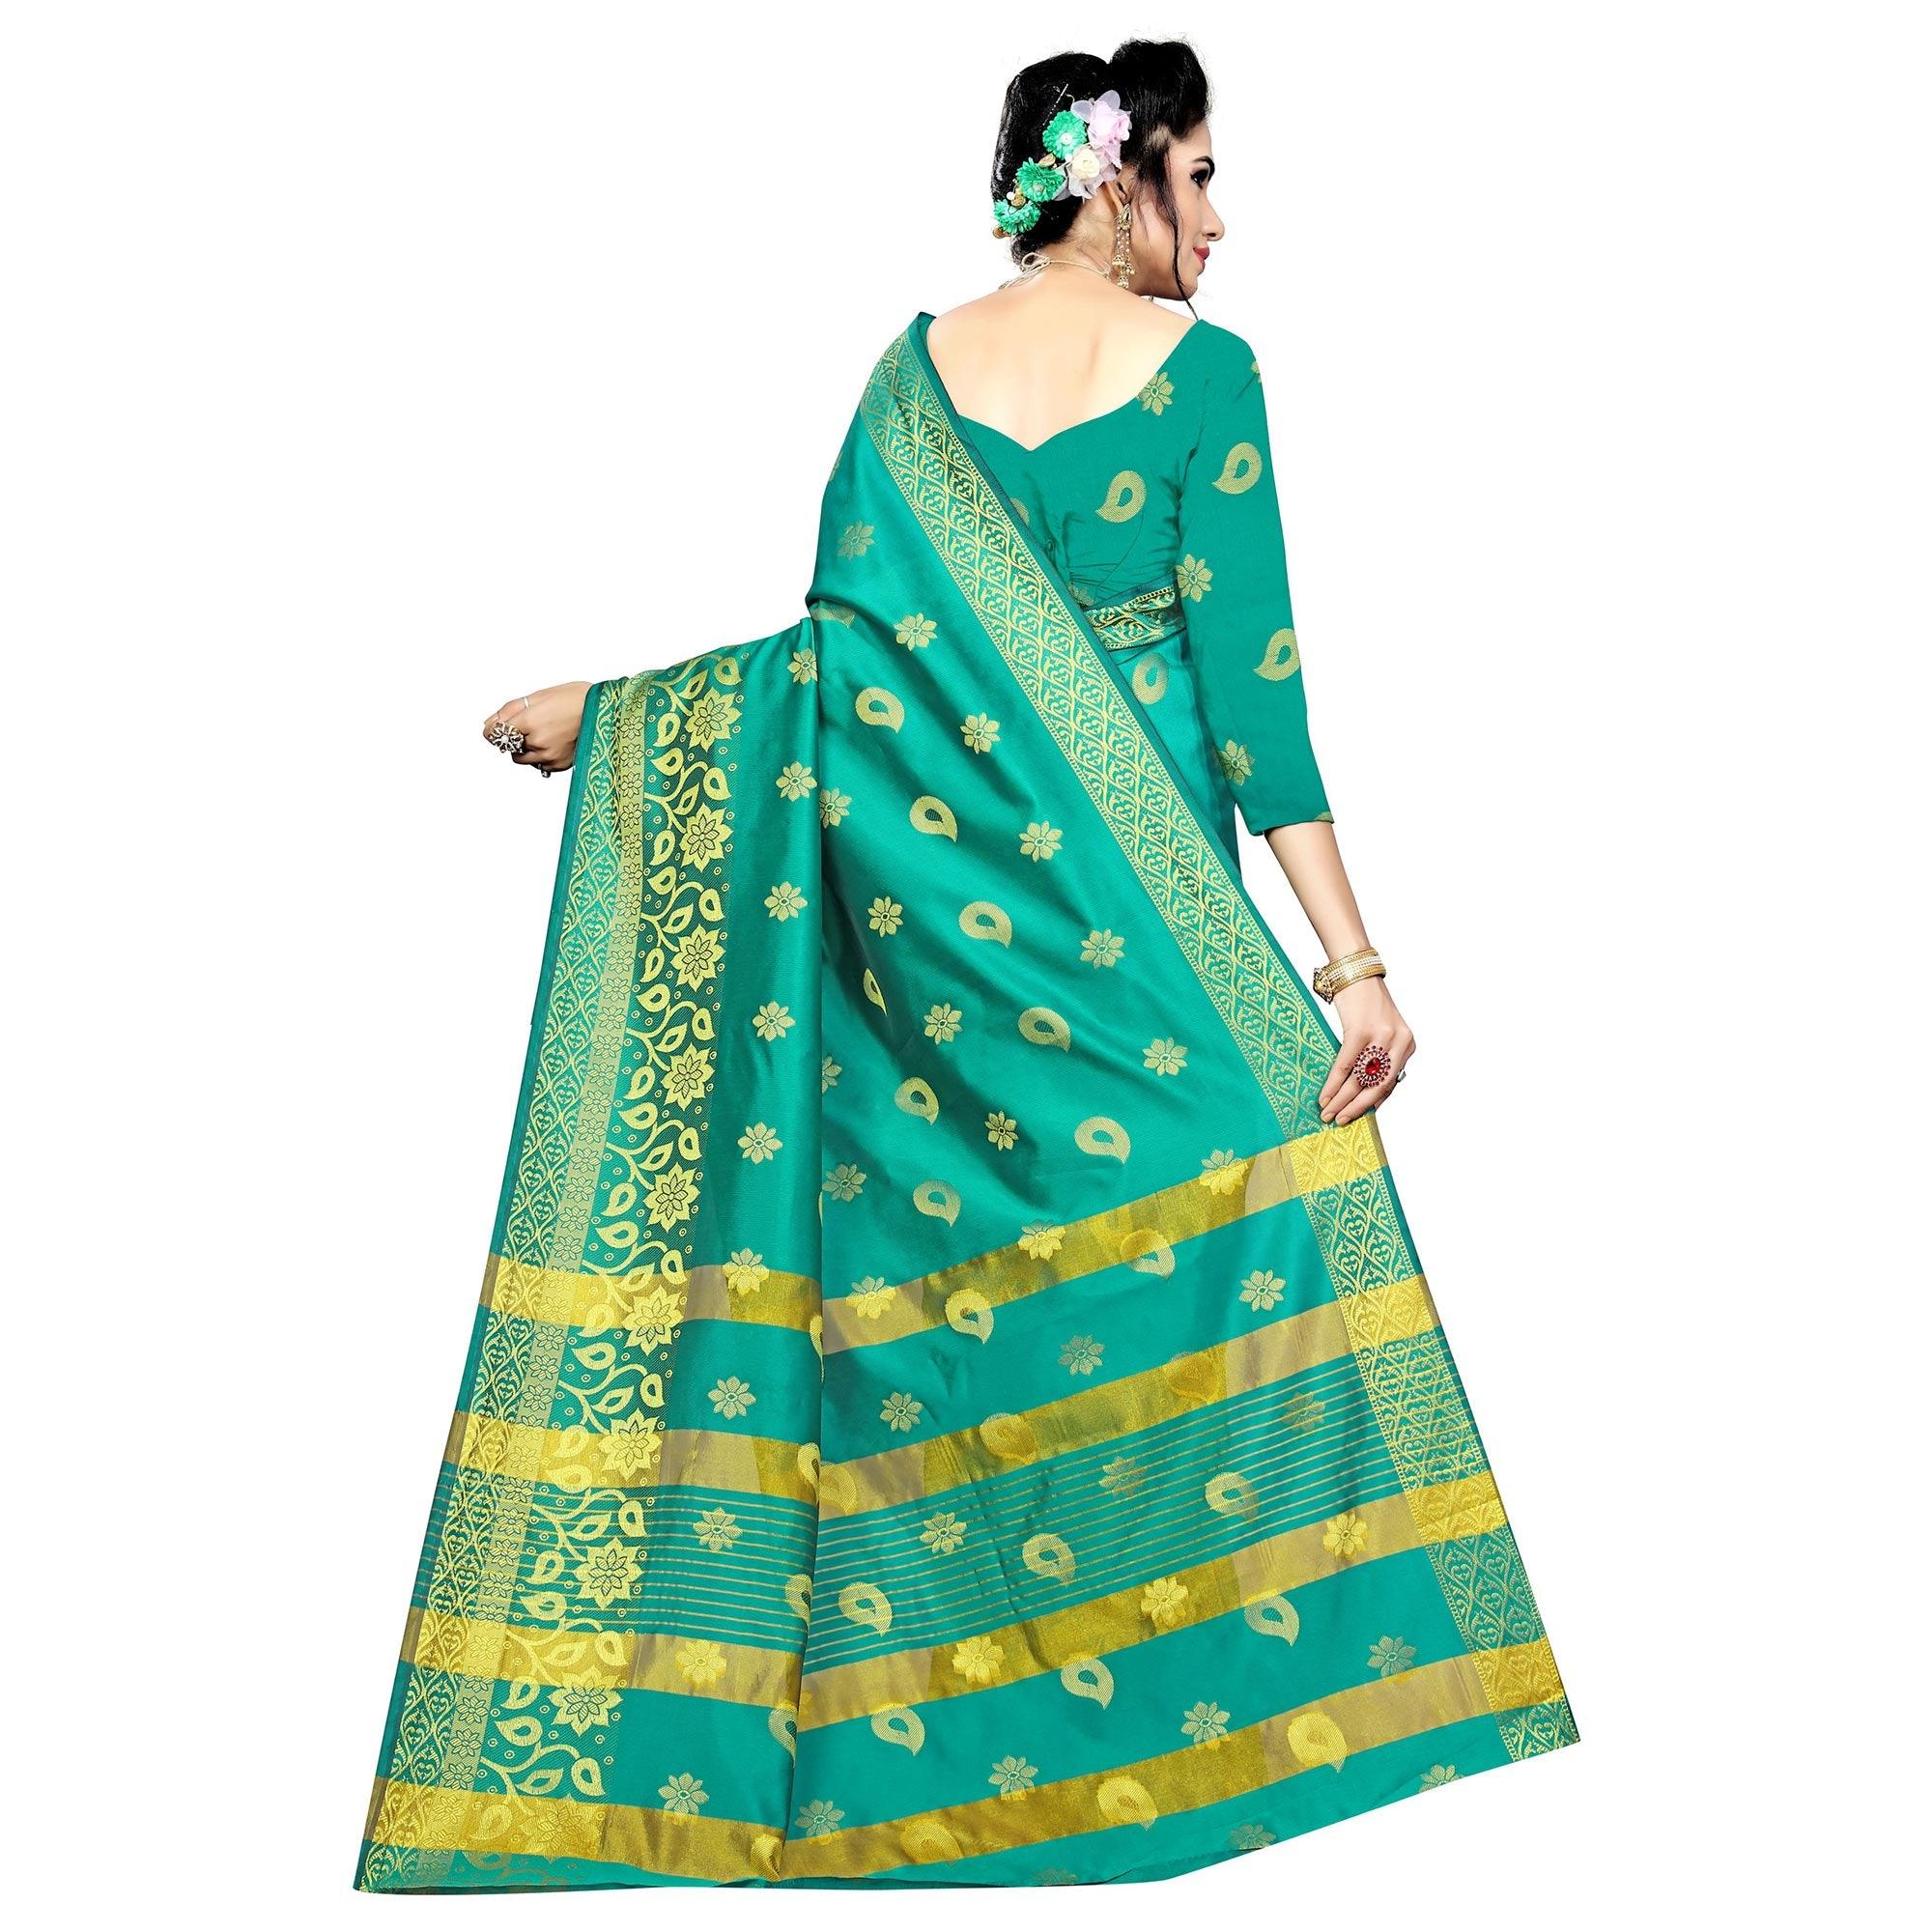 Exceptional Turquoise Green Colored Festive Wear Woven Silk Saree - Peachmode